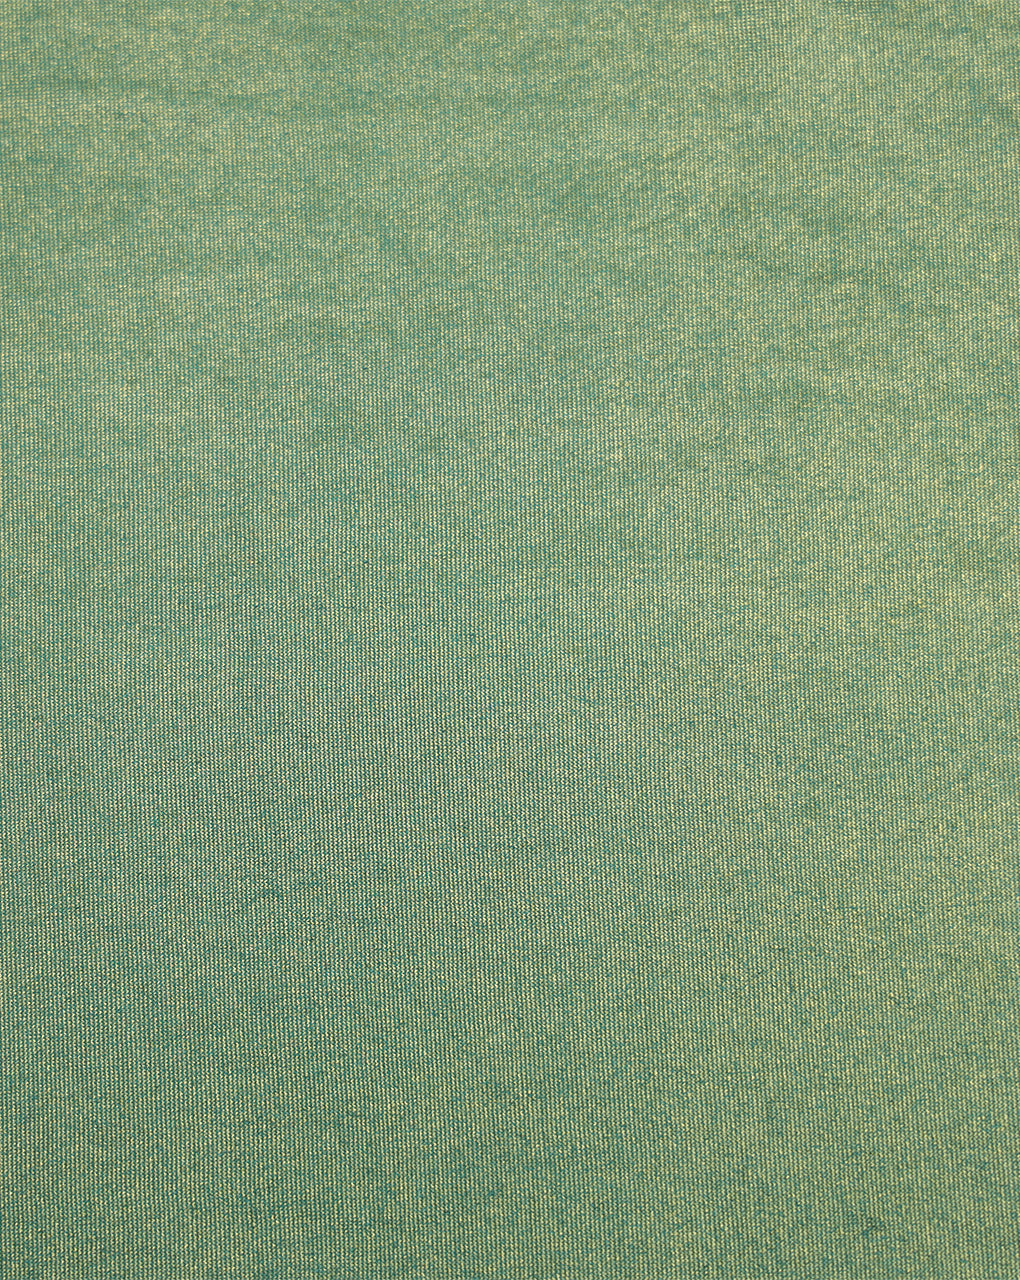 SEA GREEN POLYESTER KNITTED FOIL FABRIC